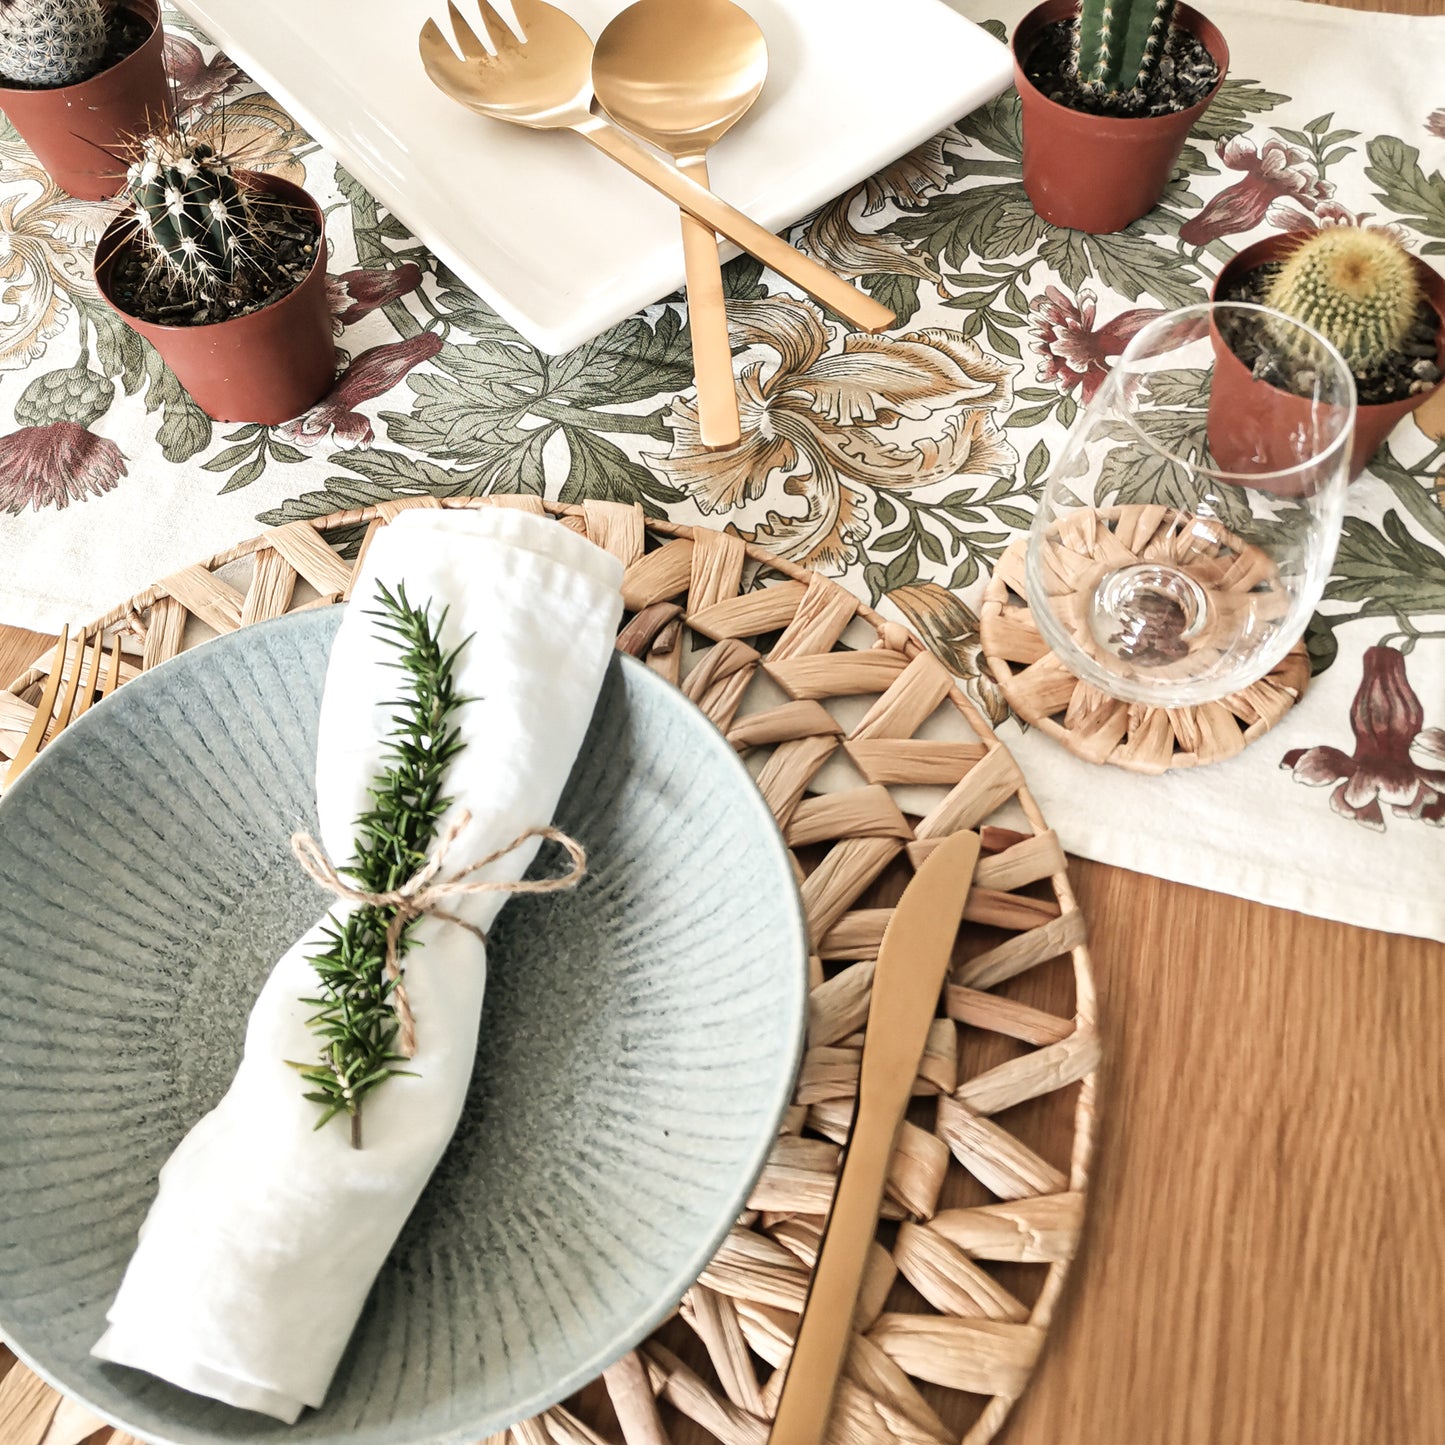 Round handwoven natural seagrass placemats perfect for casual everyday dining or Christmas holiday parties.